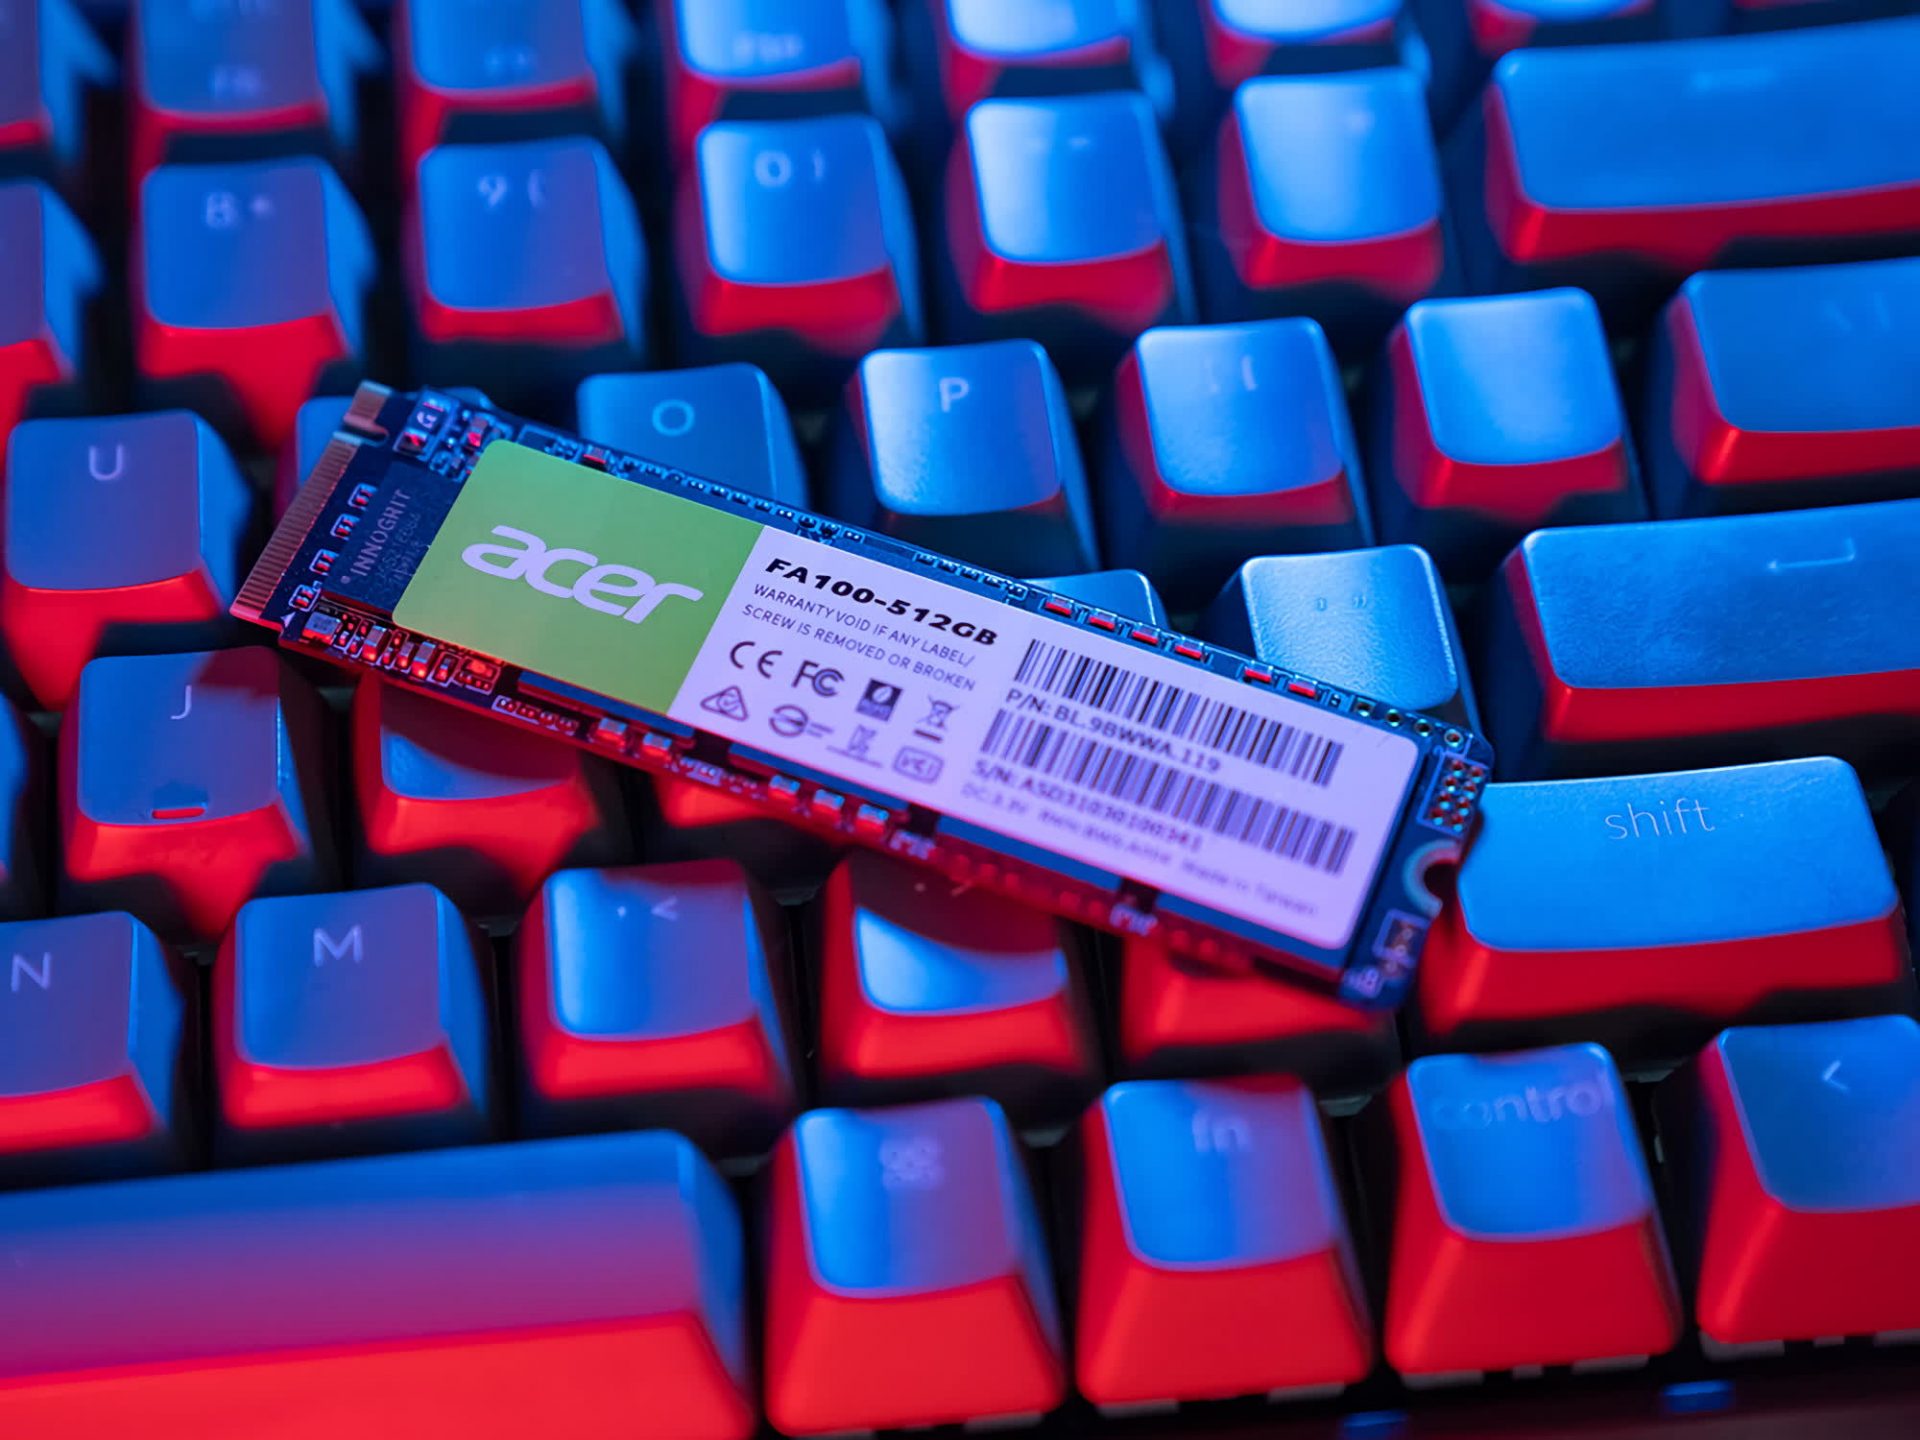 Acer will rapidly promote SSDs and RAM kits made by Chinese language chipmaker Biwin